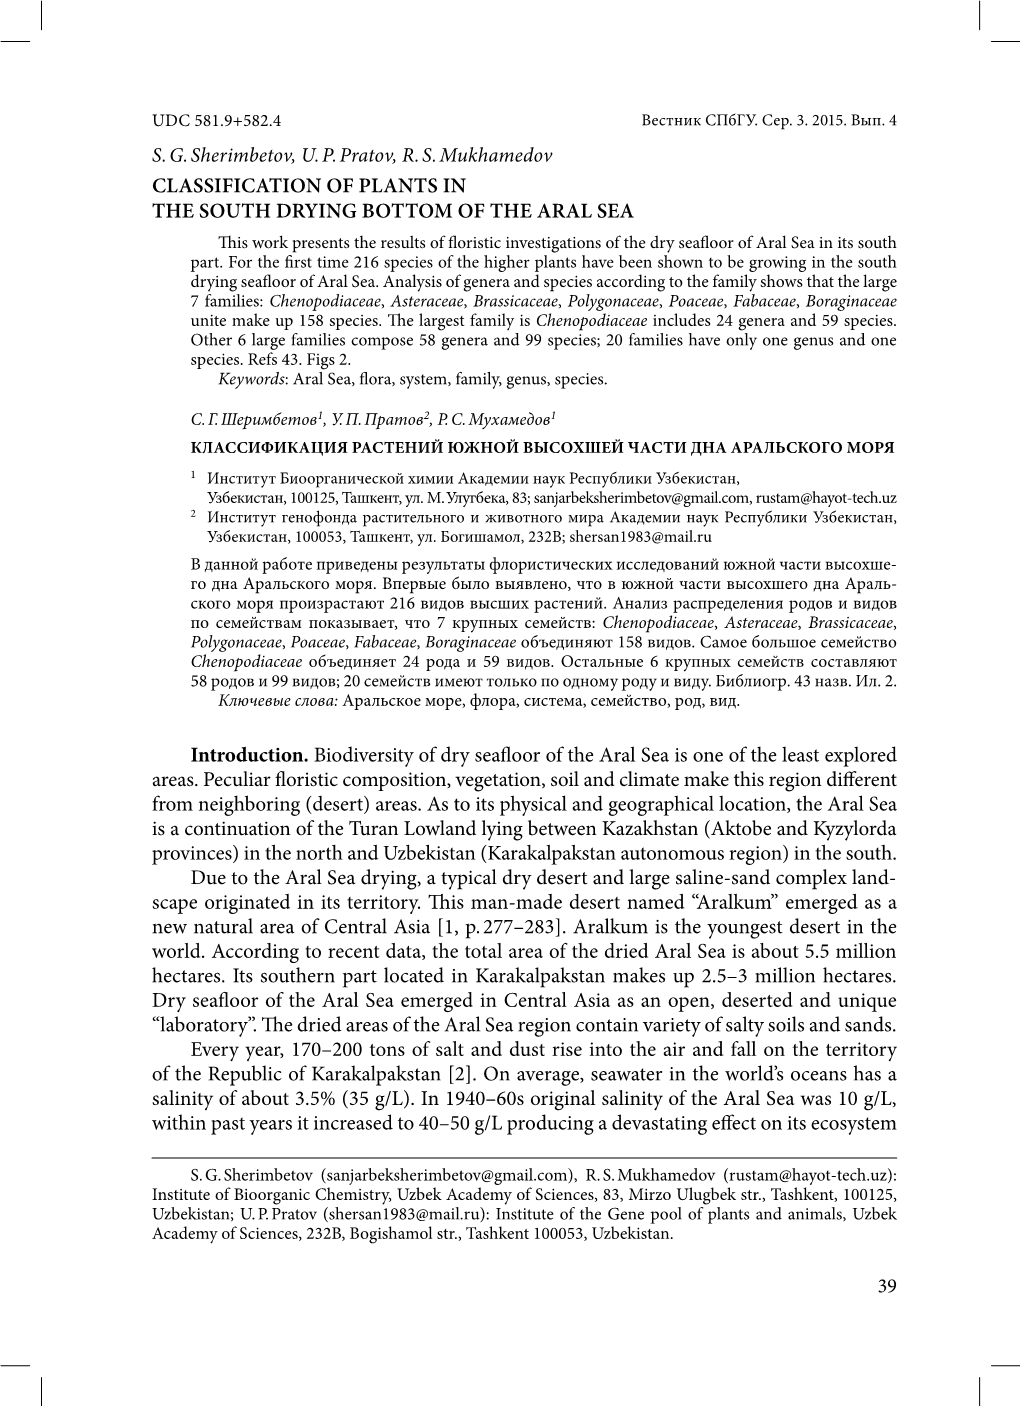 CLASSIFICATION of PLANTS in the SOUTH DRYING BOTTOM of the ARAL SEA Introduction. Biodiversity of Dry Seafloor of the Aral Sea I